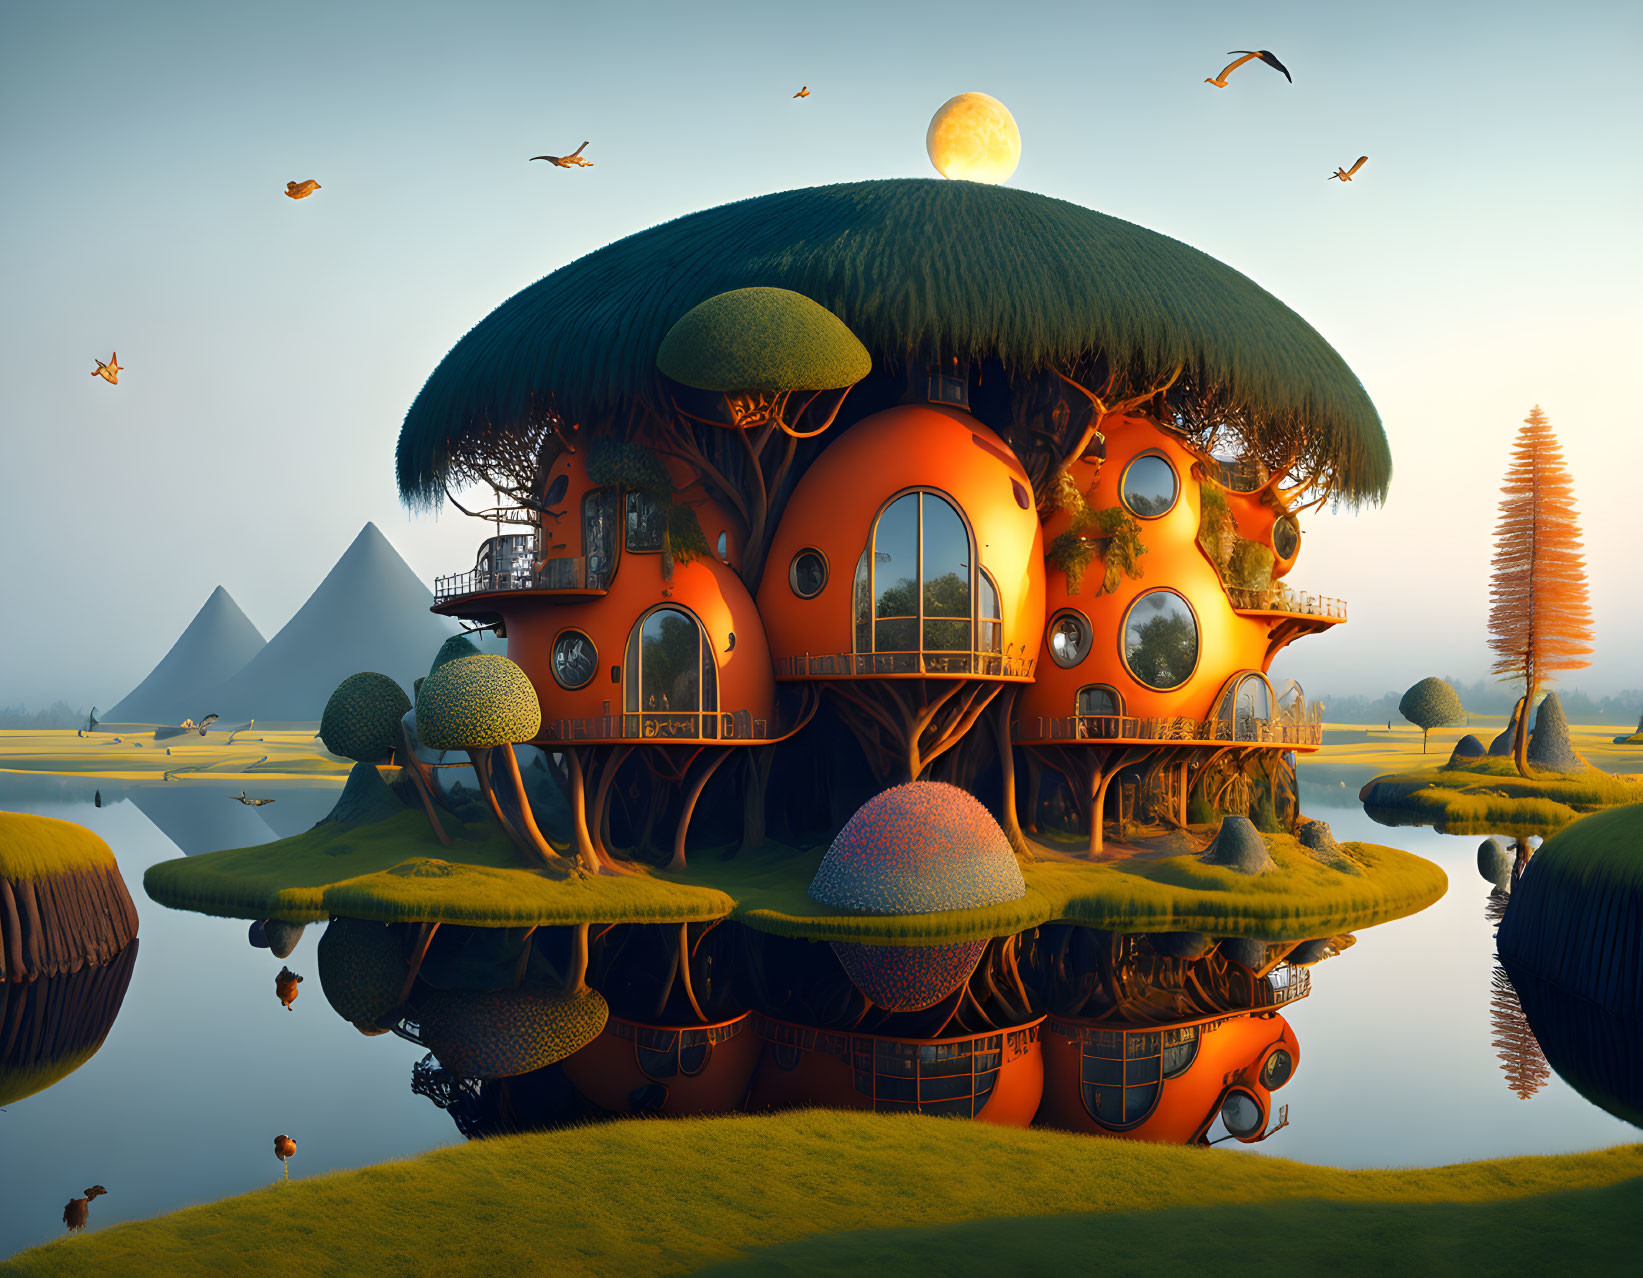 Whimsical Mushroom-Shaped House Surrounded by Water and Pyramids